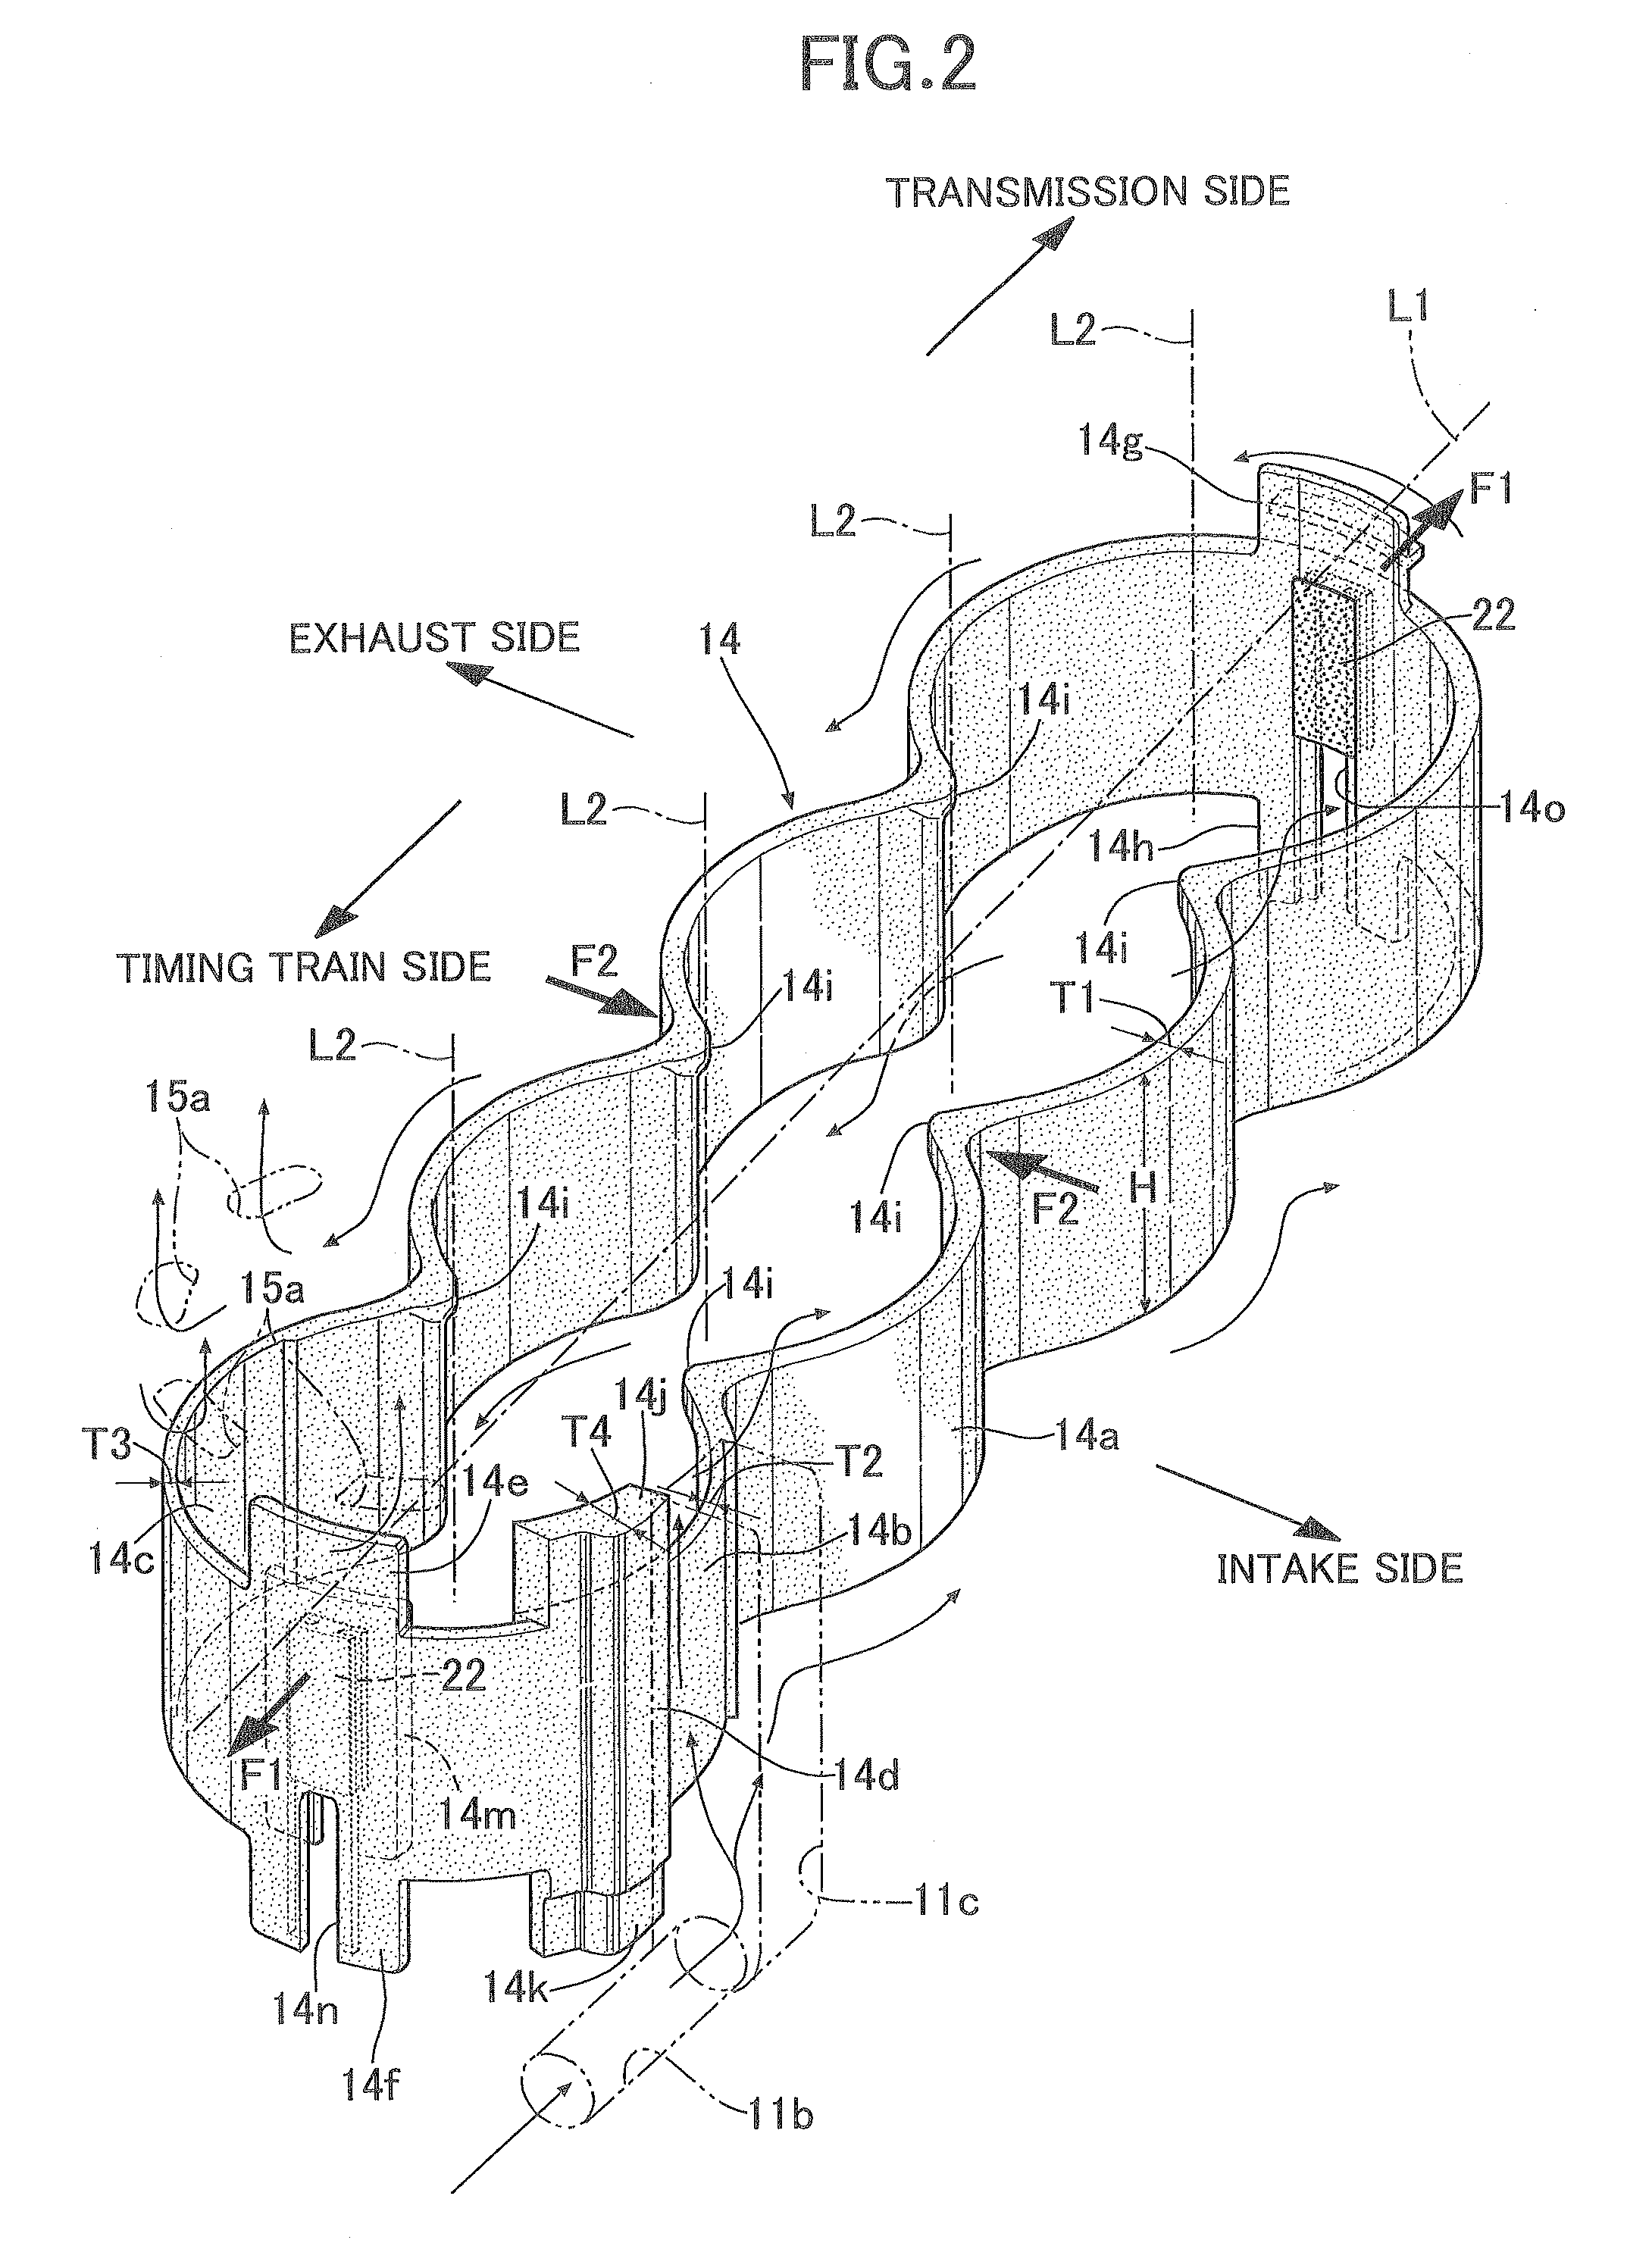 Cooling structure for internal combustion engine